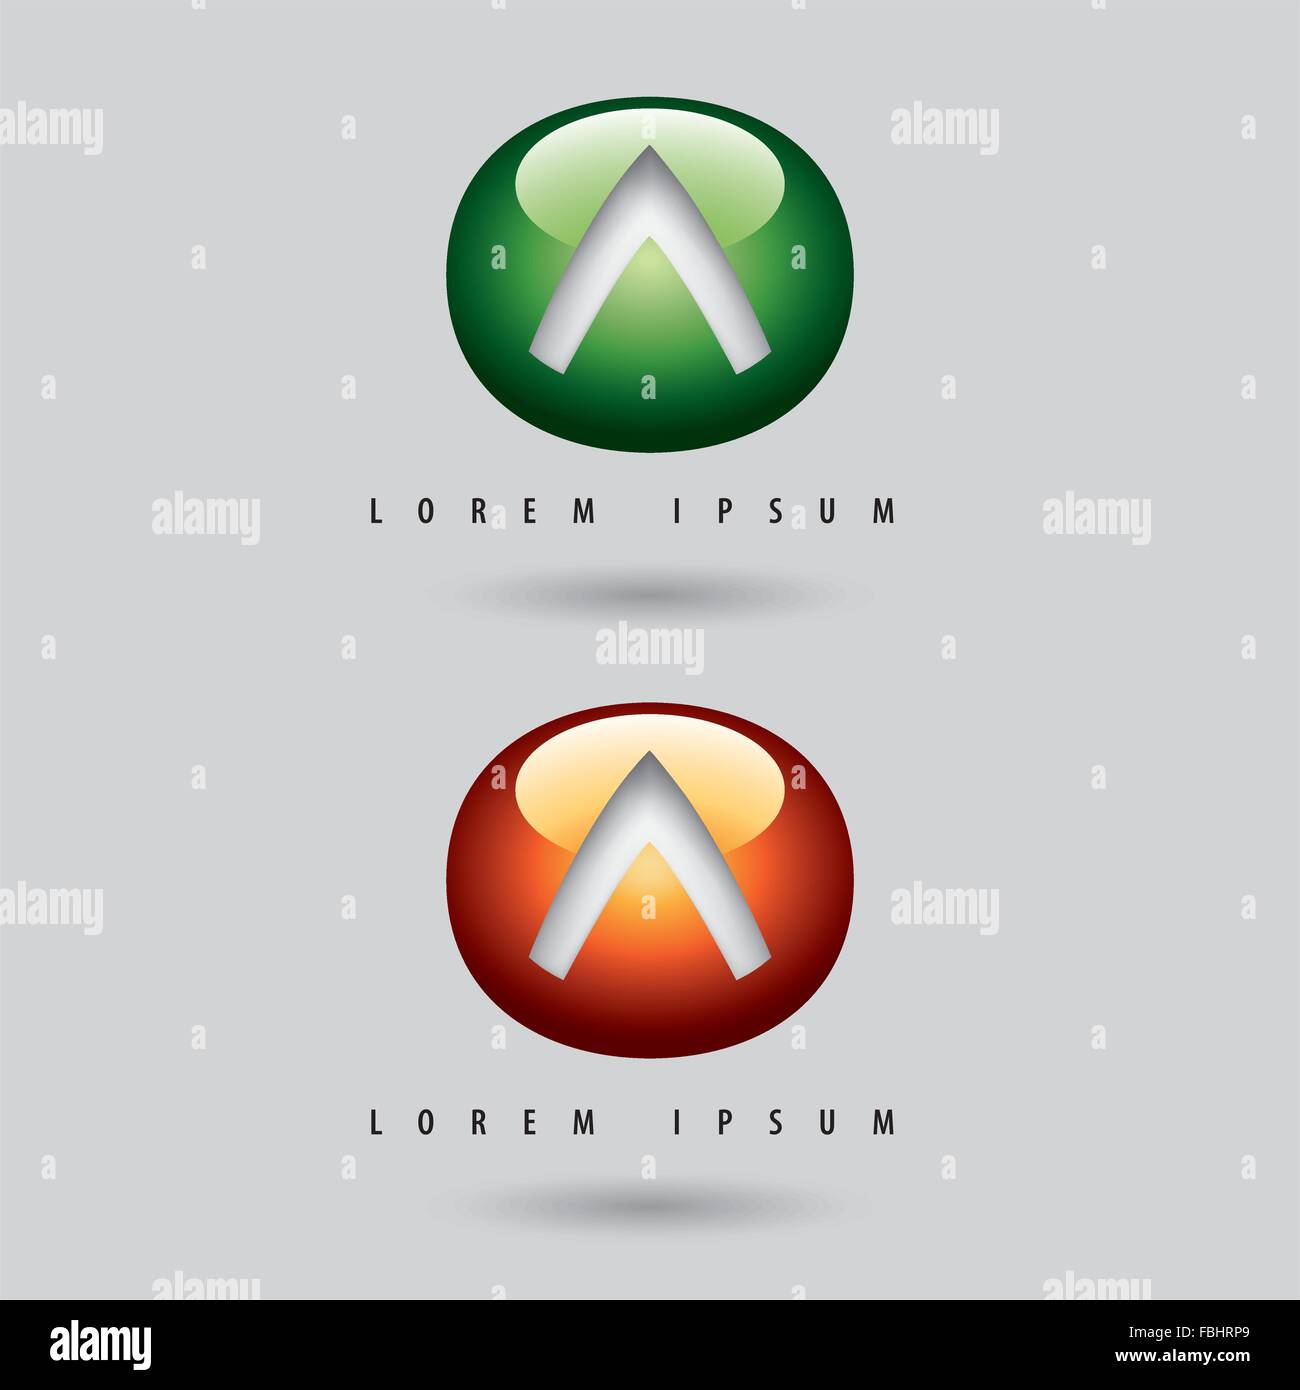 Set of dynamic logos with a triangle or arrow symbol Stock Vector